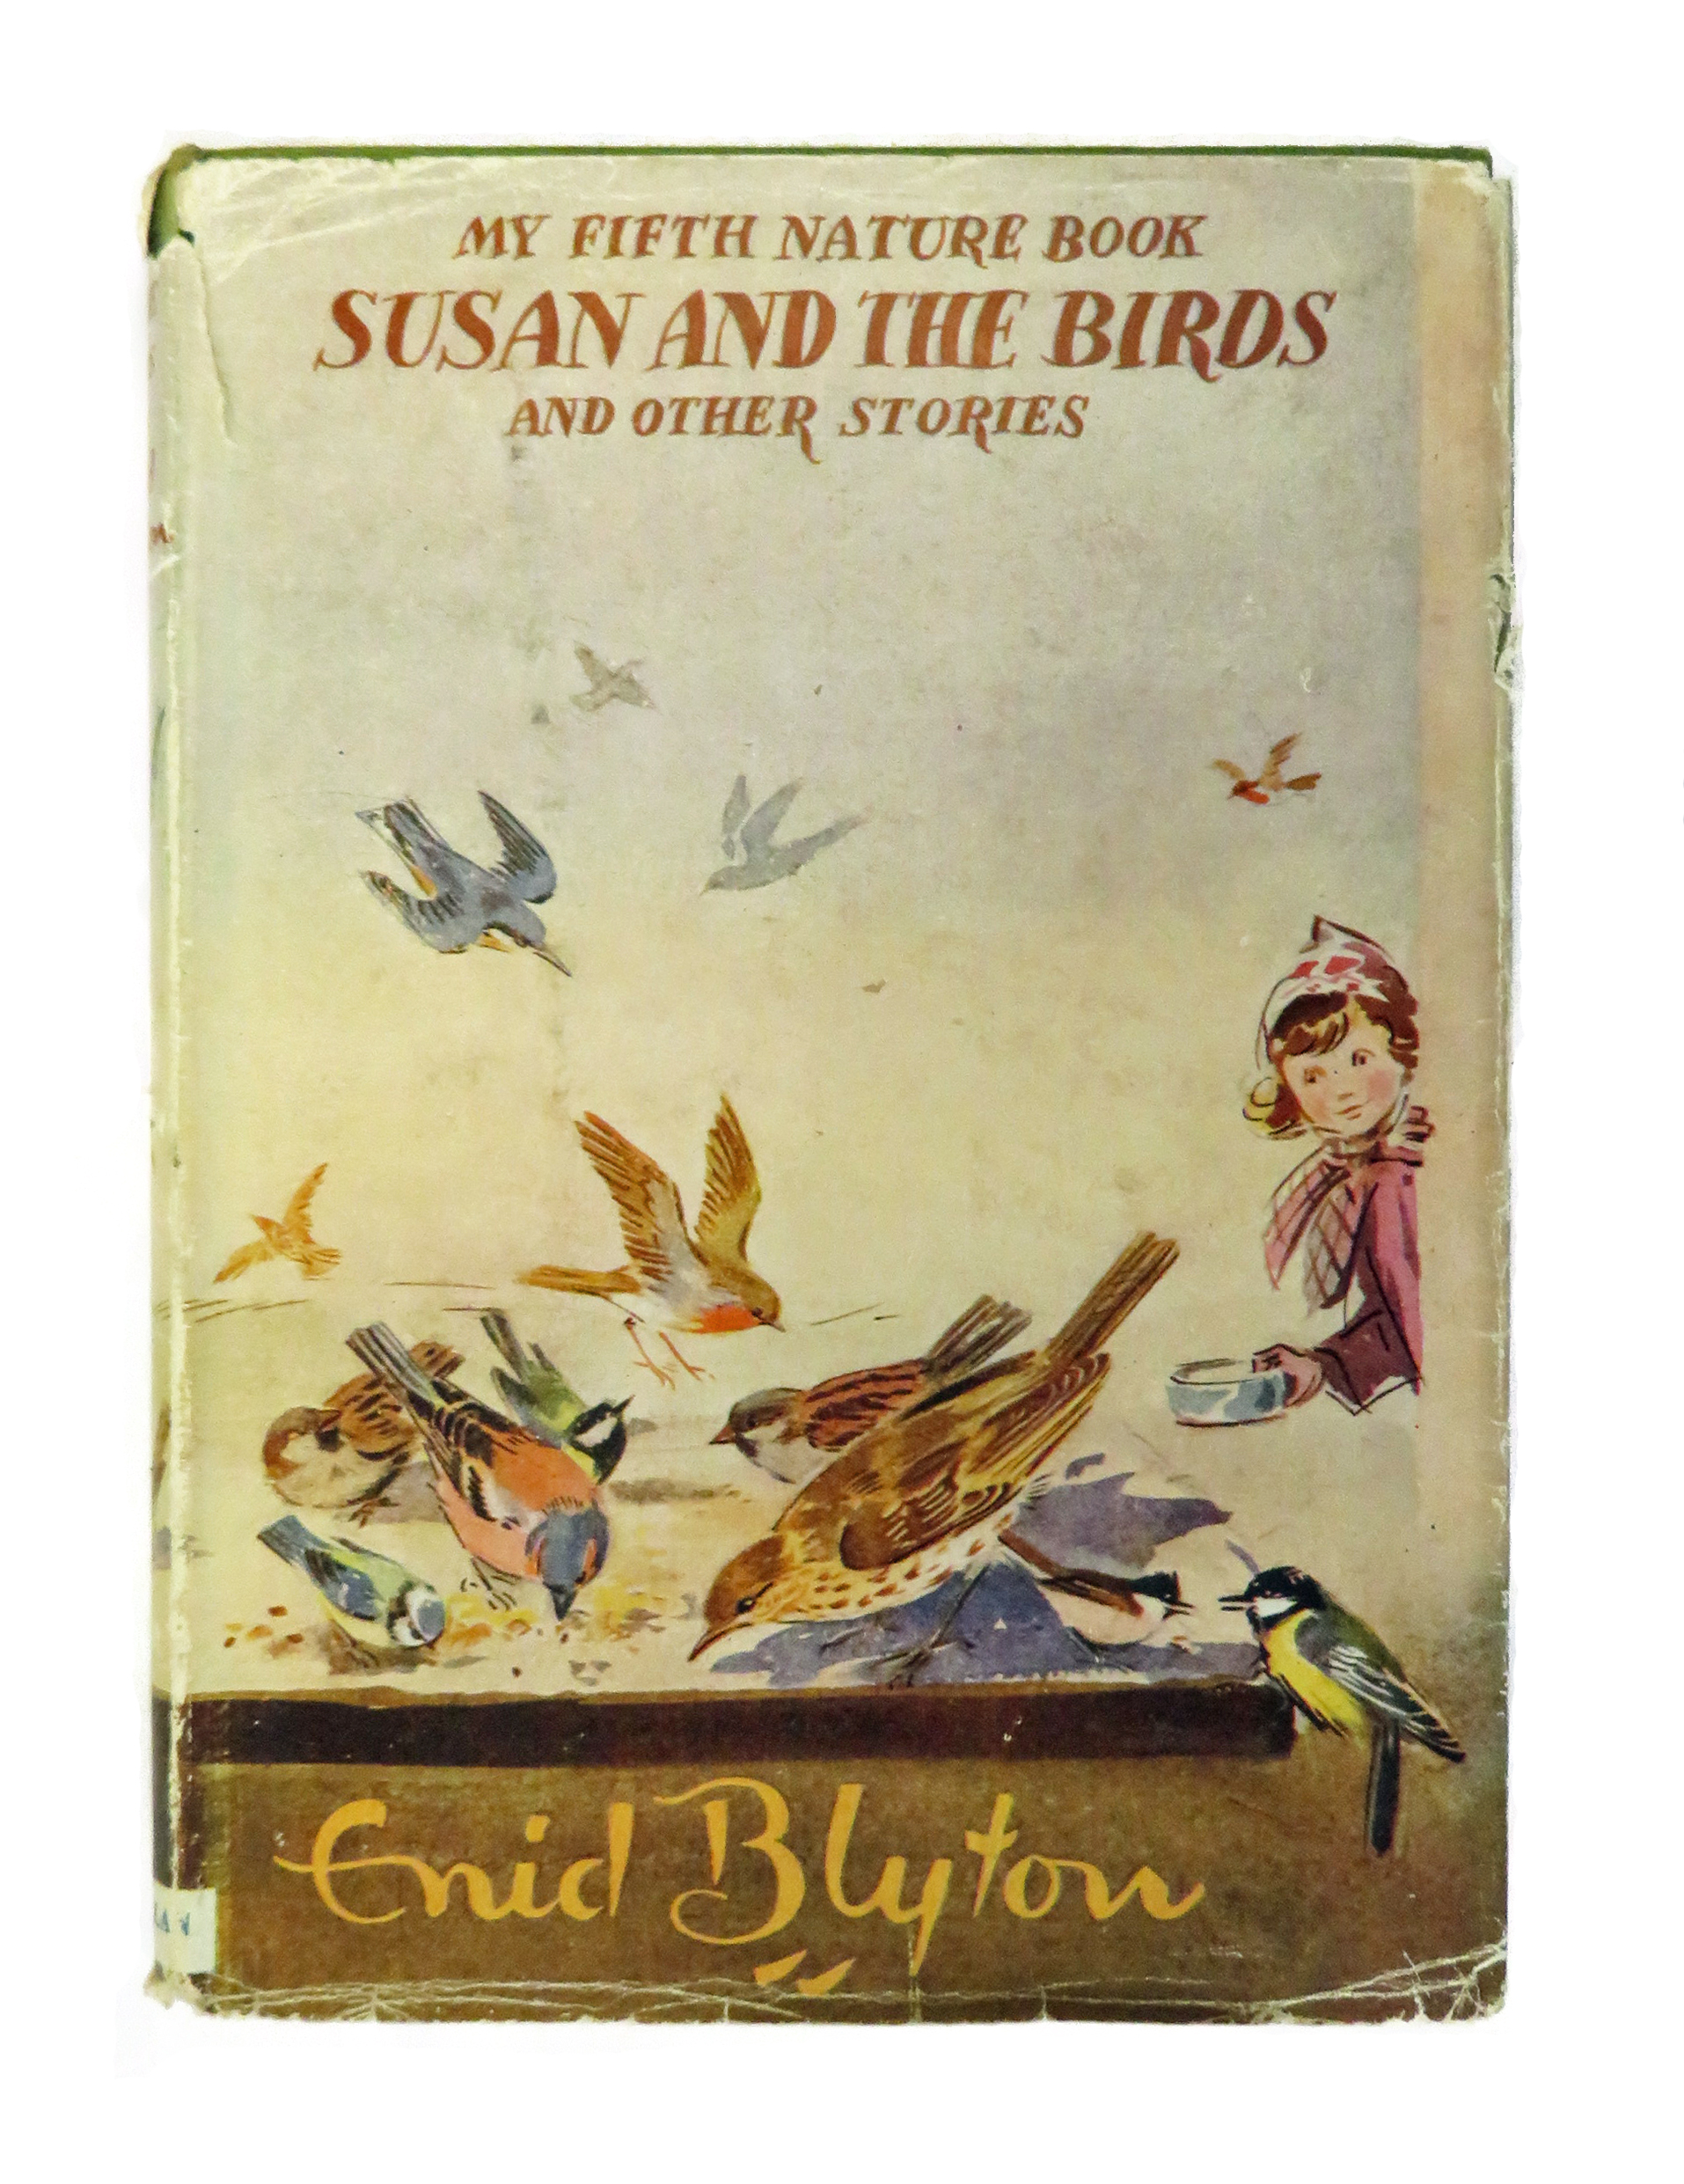 My Fifth Nature Book. Susan and the Birds and Other Stories